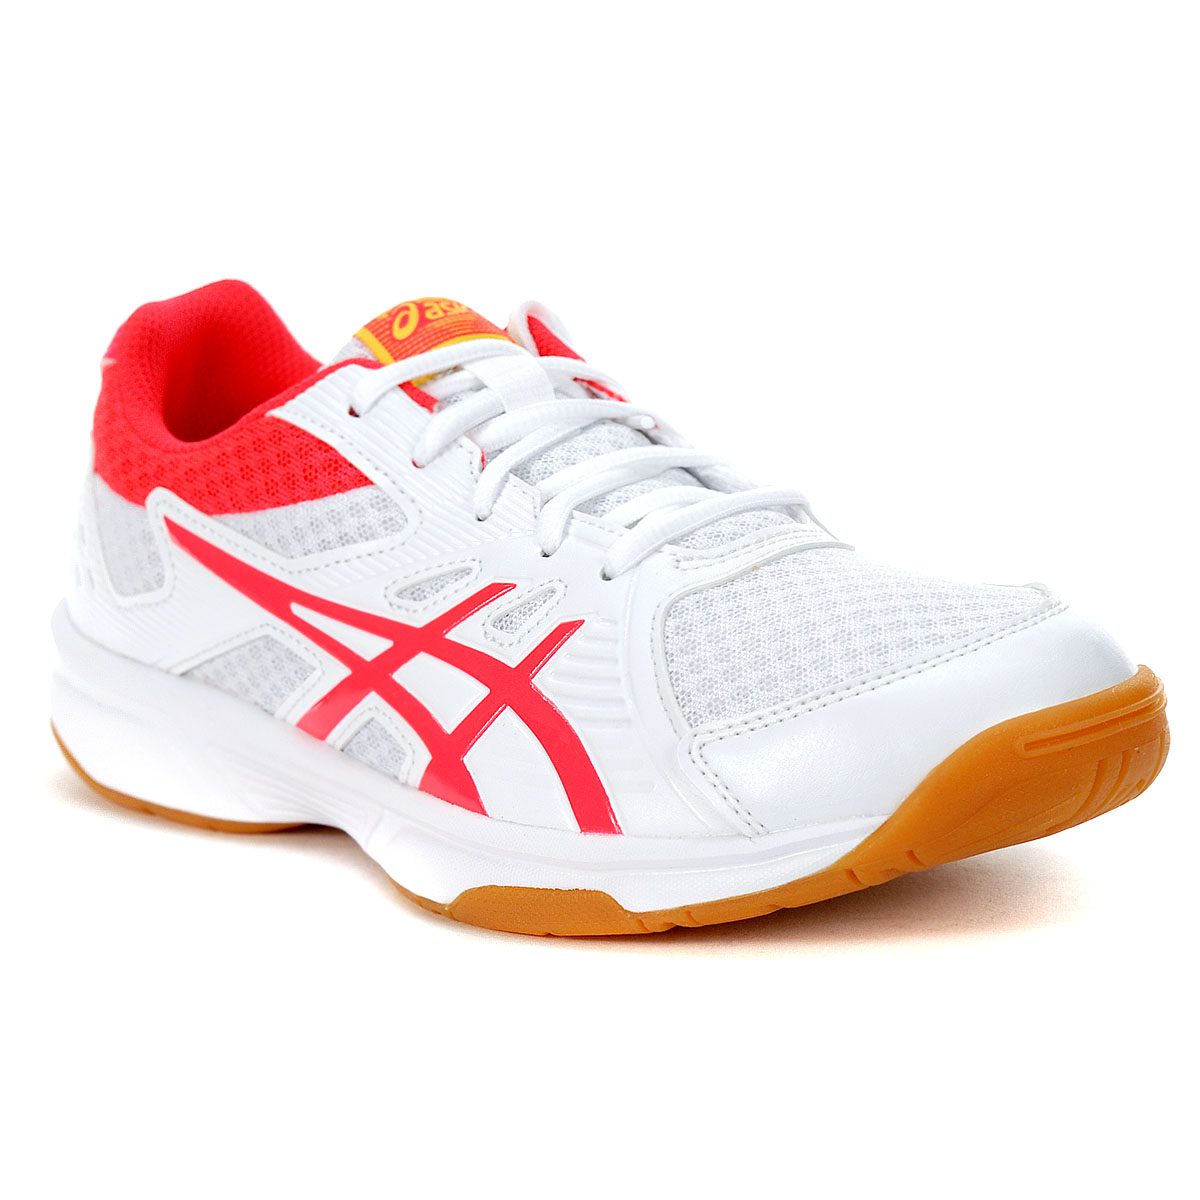 ASICS Women's Upcourt 3 White/Laser Pink Volleyball Shoes